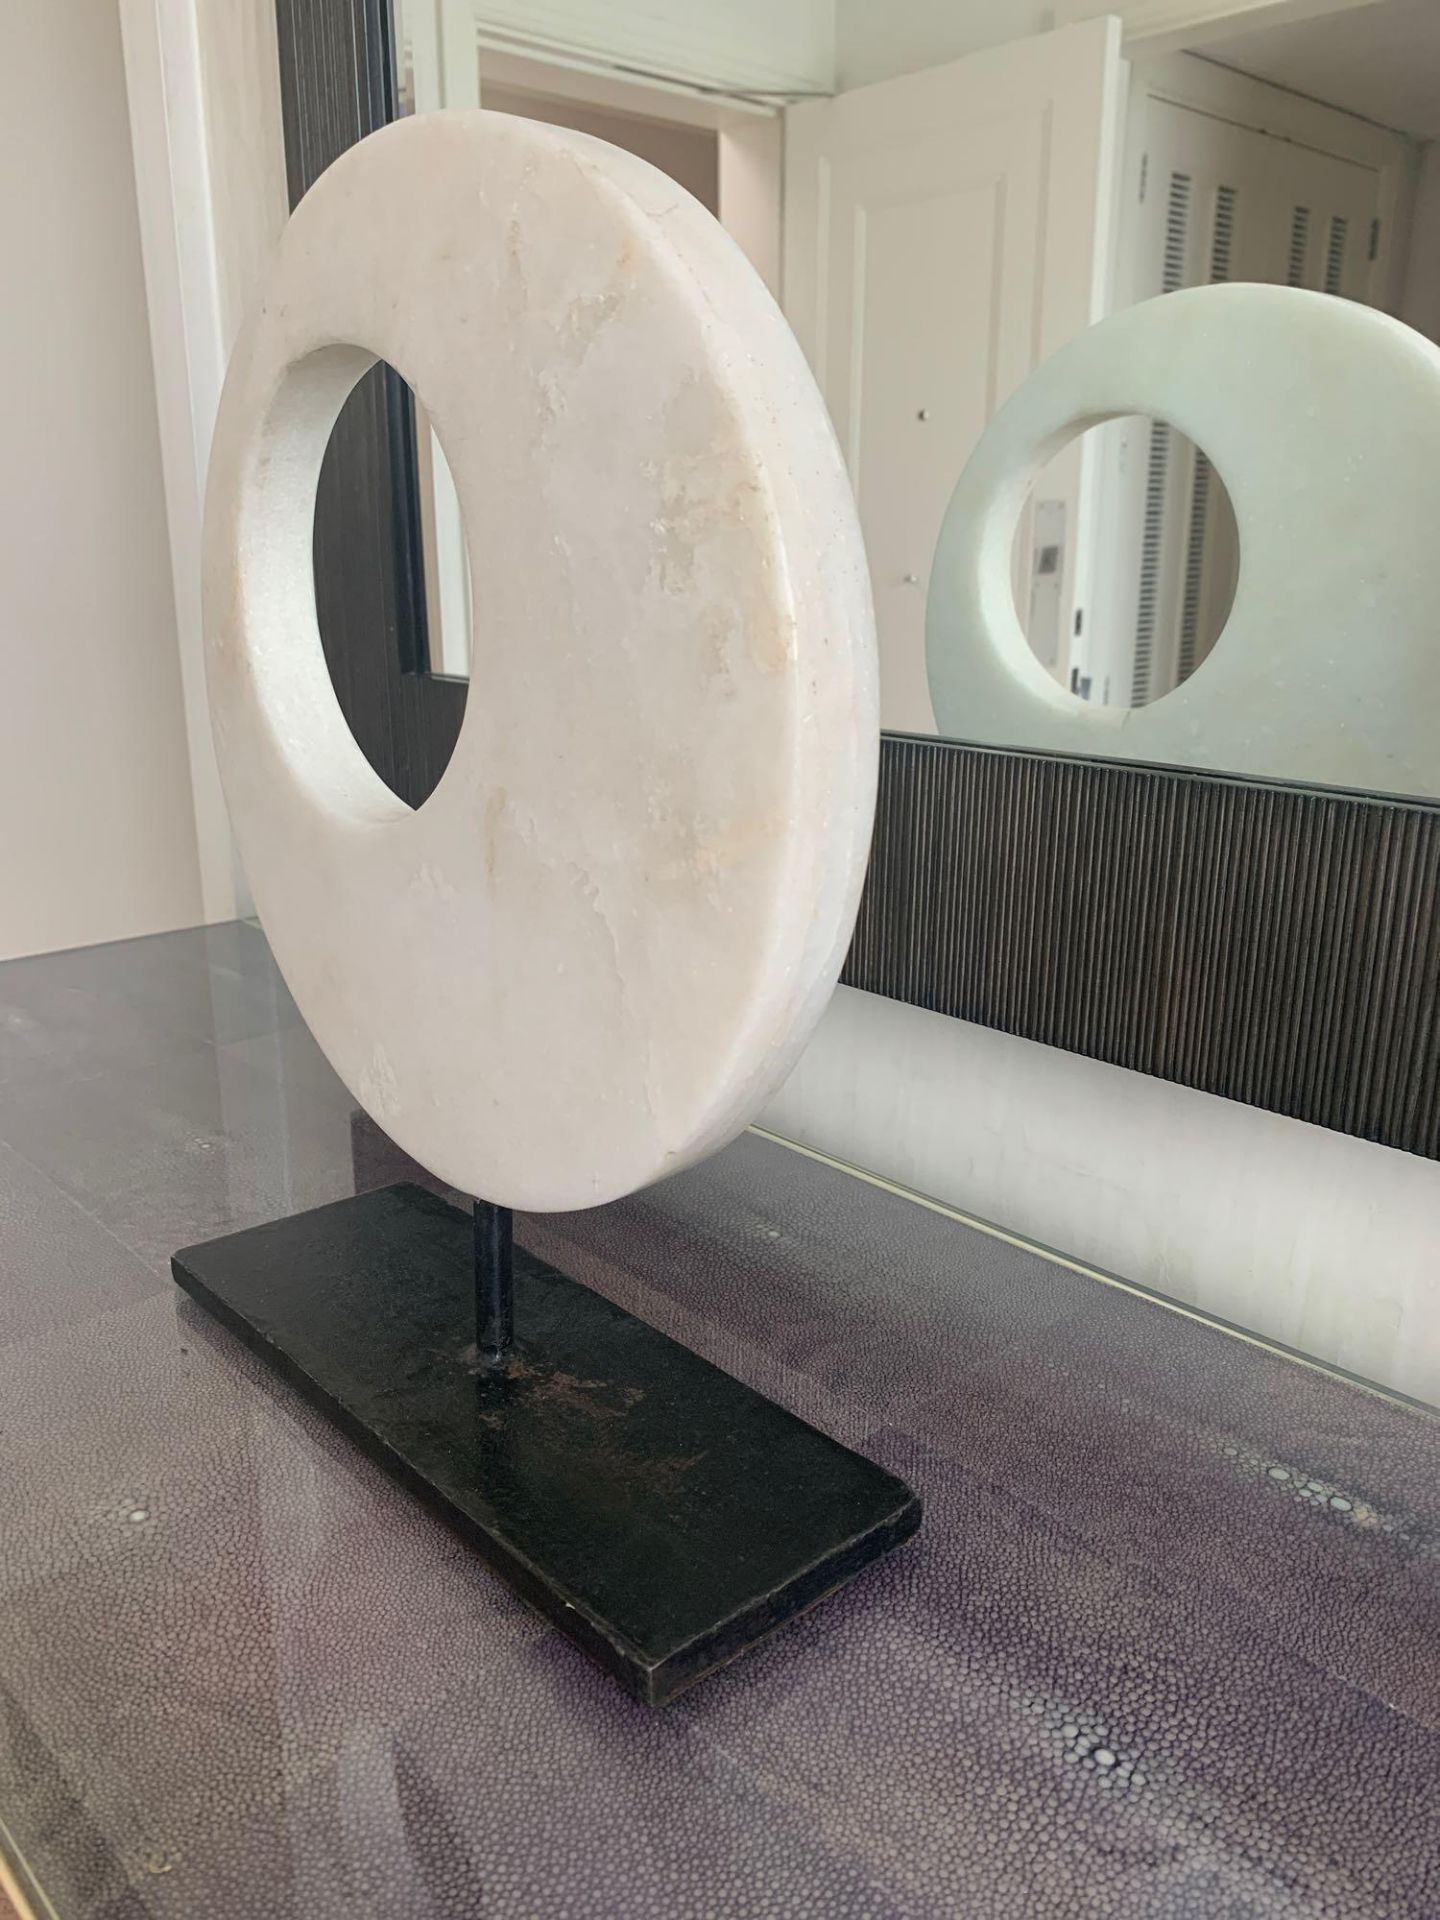 White Marble Disc Shaped Ornamental Sculpture With Hole On Metal Base (Harlequin hallway ) - Image 2 of 2